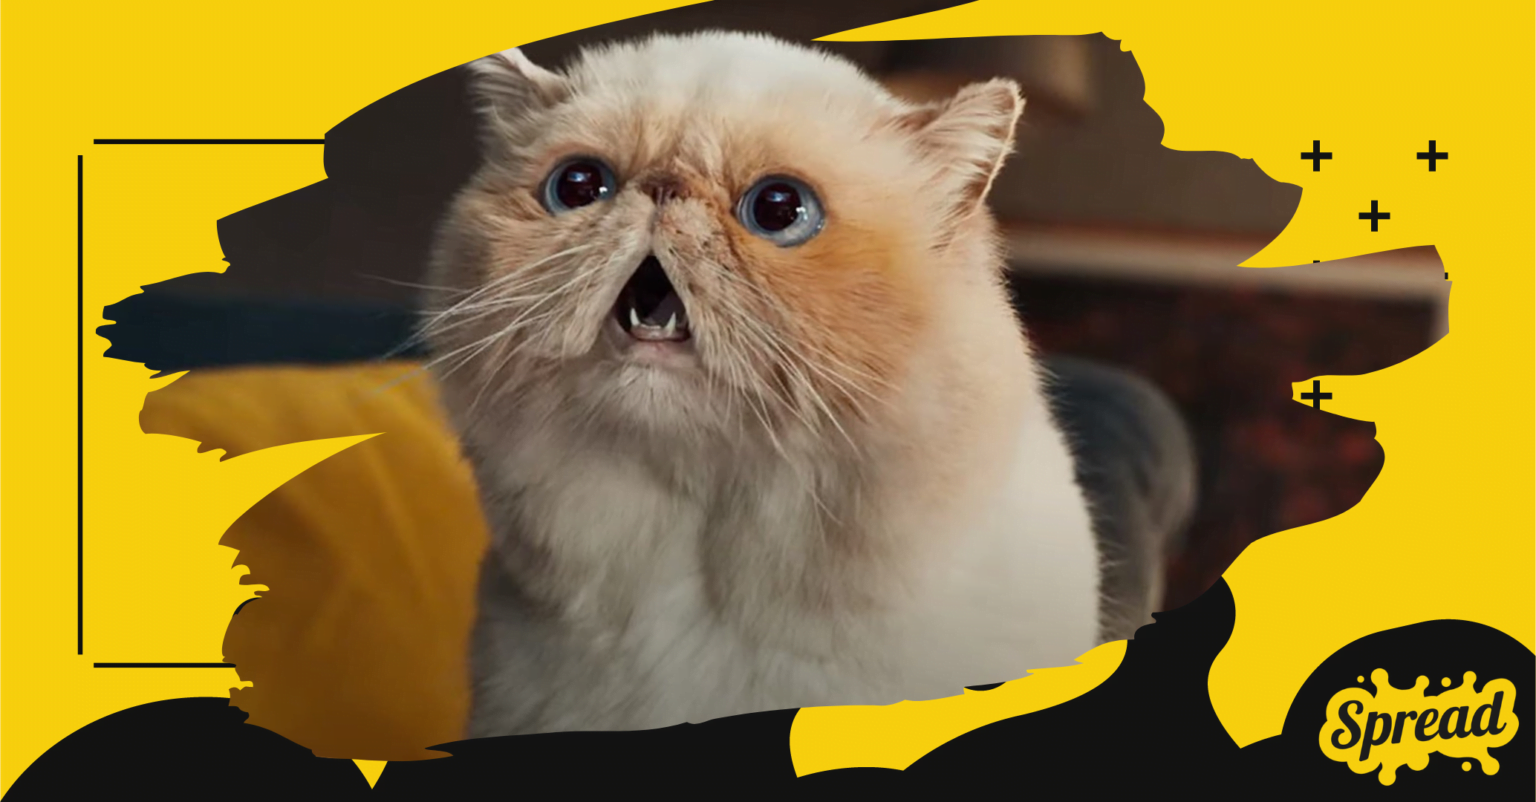 Samsung Latest Ad Campaign Goes to Great Lengths to Impress a Grumpy Feline